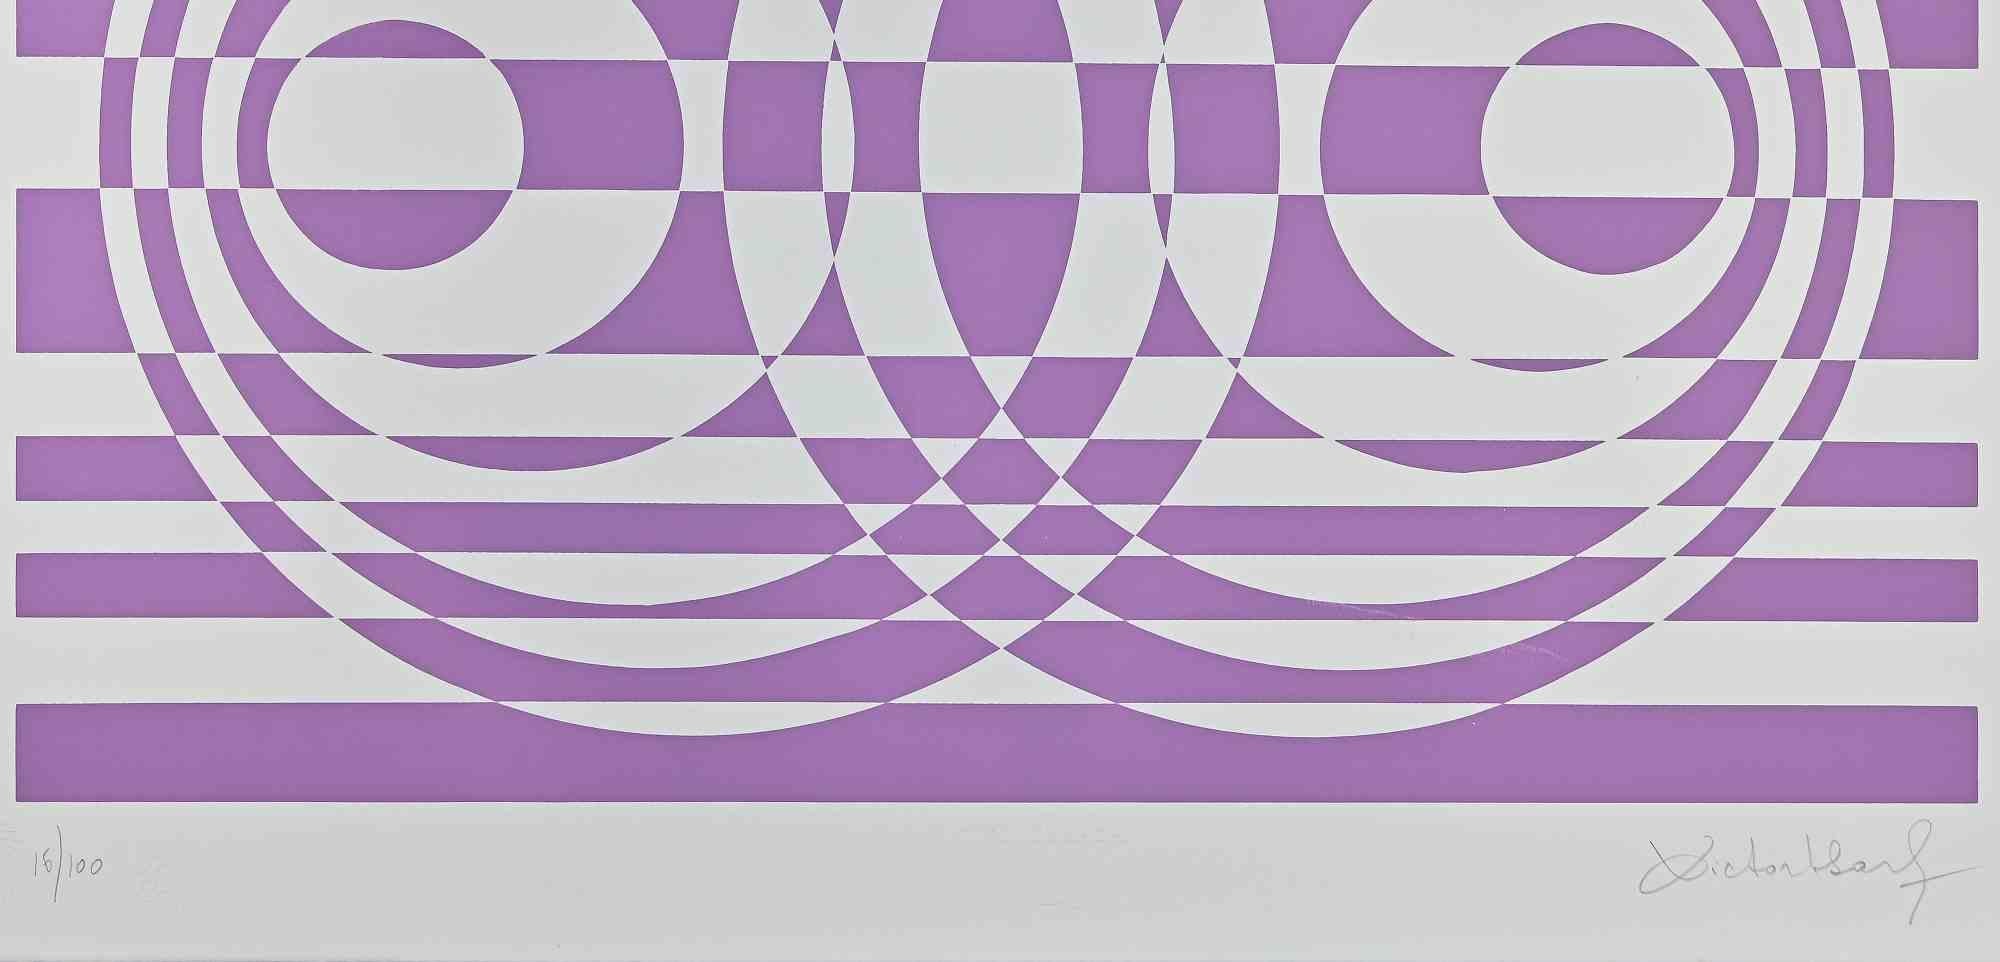 Abstract composition in purple in a screenprint realized by Victor Debach in 1970s. 

50x70 cm.

Edition 16/100

Handsigned in pencil on the right lower margin.

Excellent conditions.